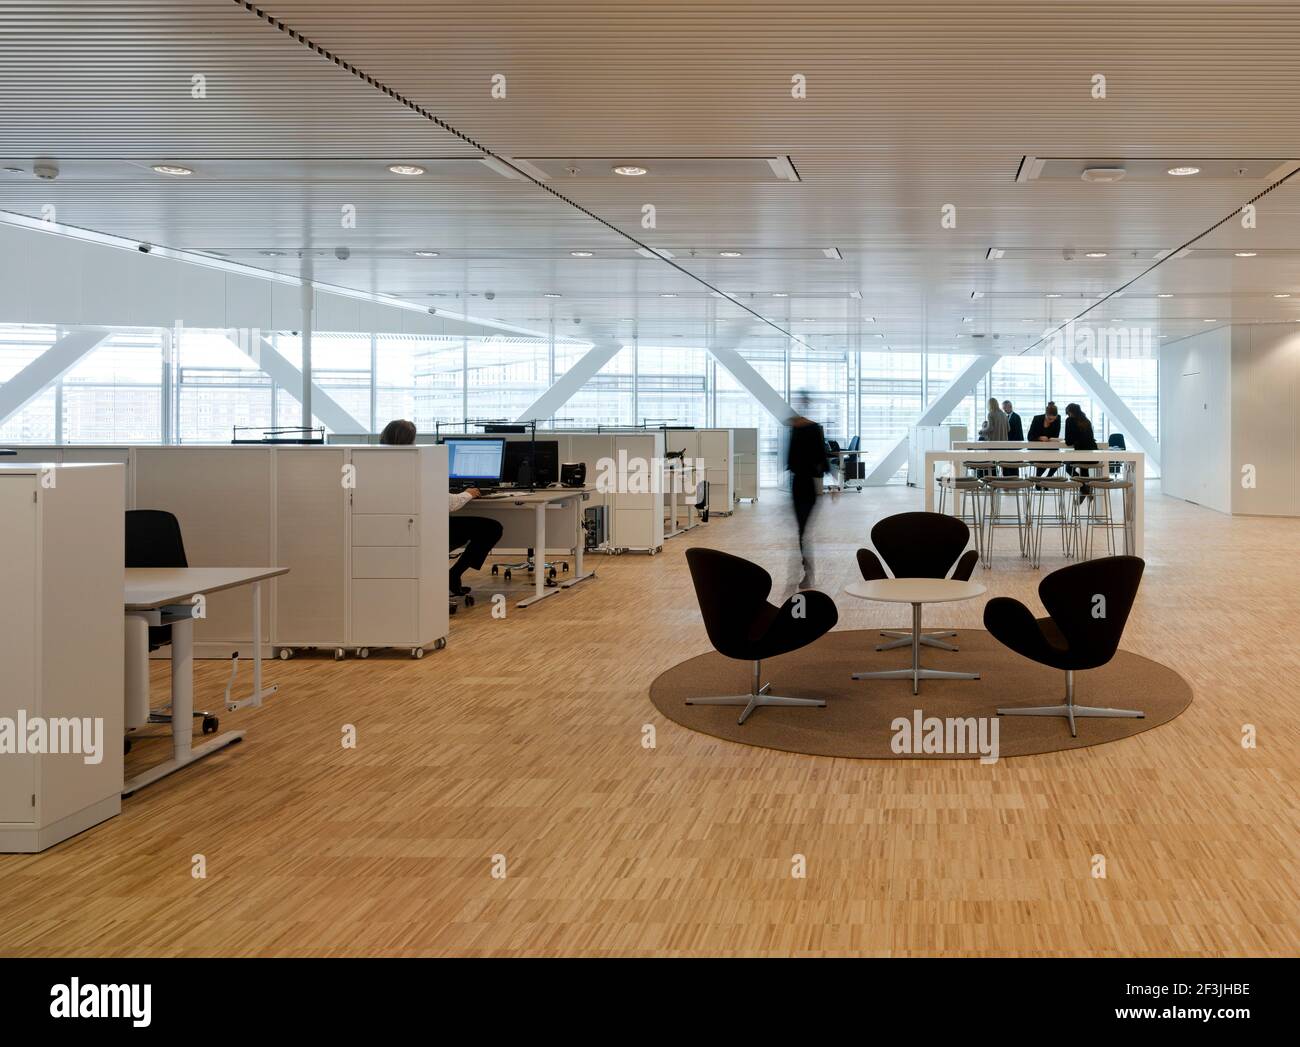 Interior view of The Crystal, Office space, Copenhagen Stock Photo - Alamy